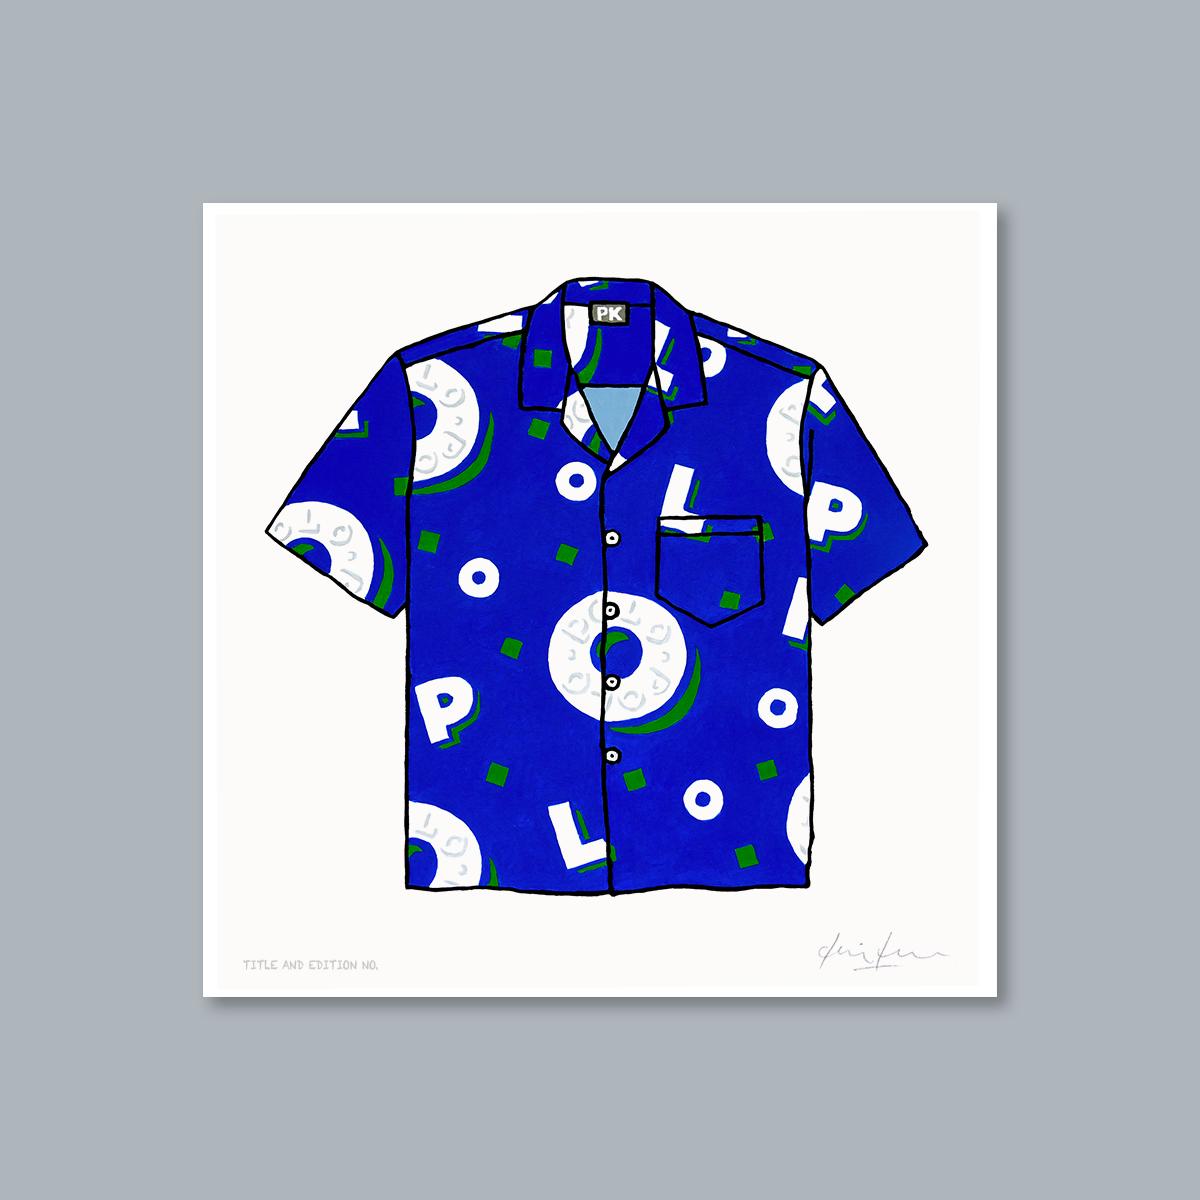 Limited edition print - Polo Shirt - unframed